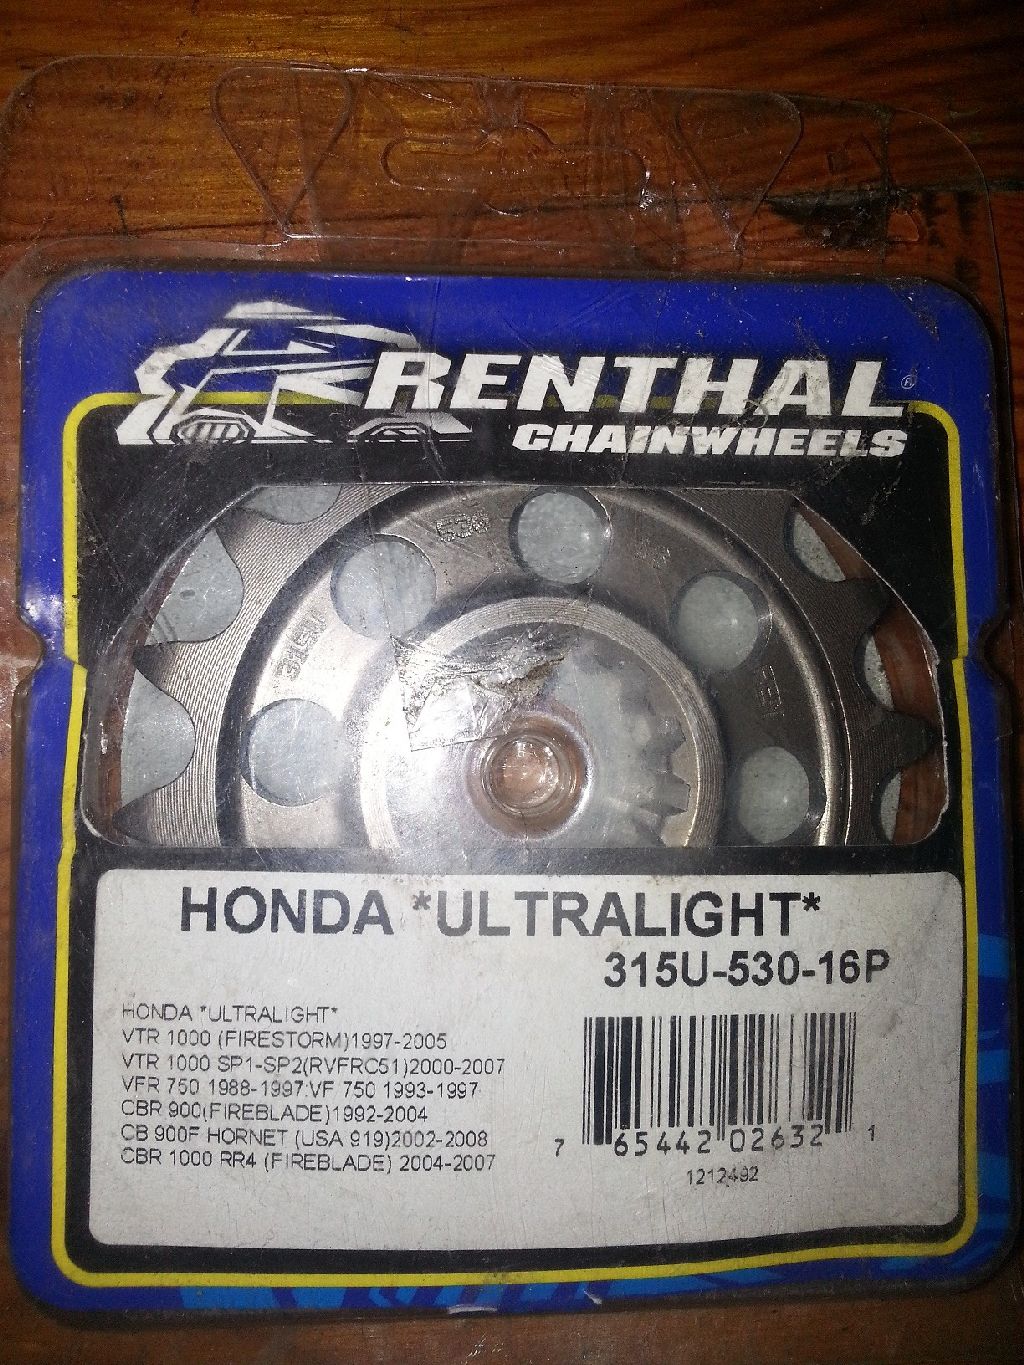 Renthal - Made In England -  Chains/Sprocket - Honda Front Sprocket 16 teeth